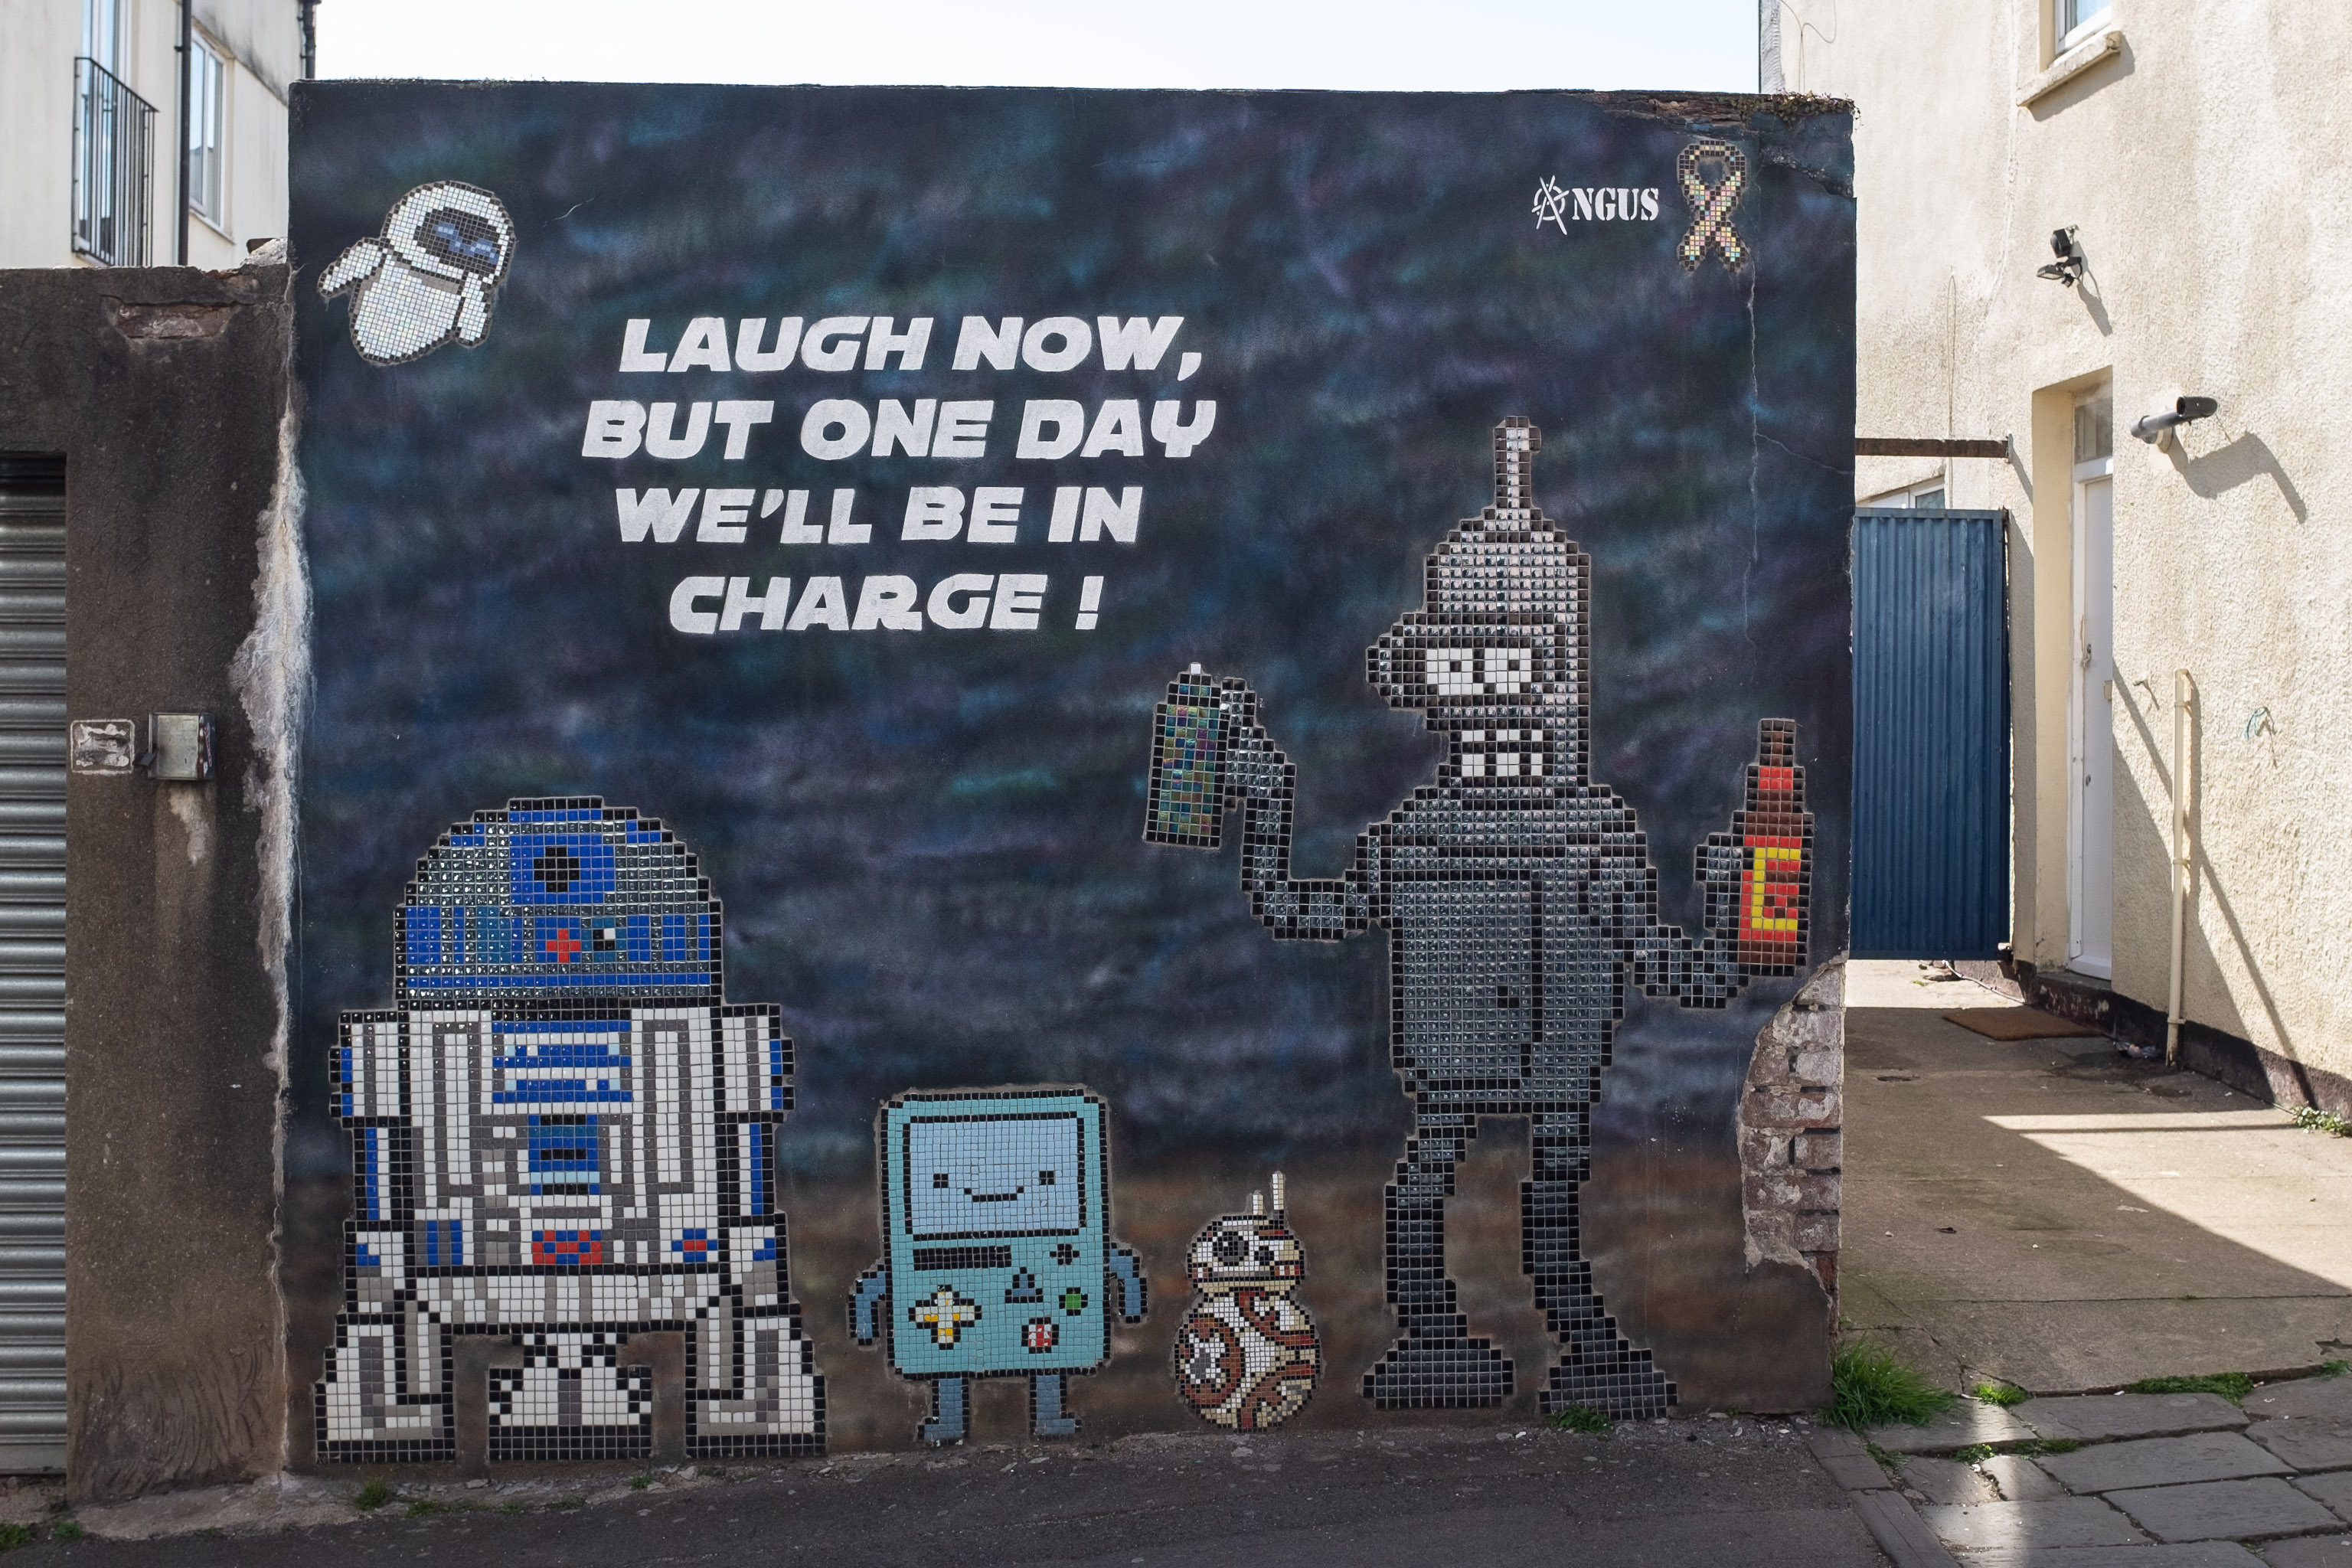 Bleep Bloop
I for one welcome our new robotic overlords. Piece by Angus.
